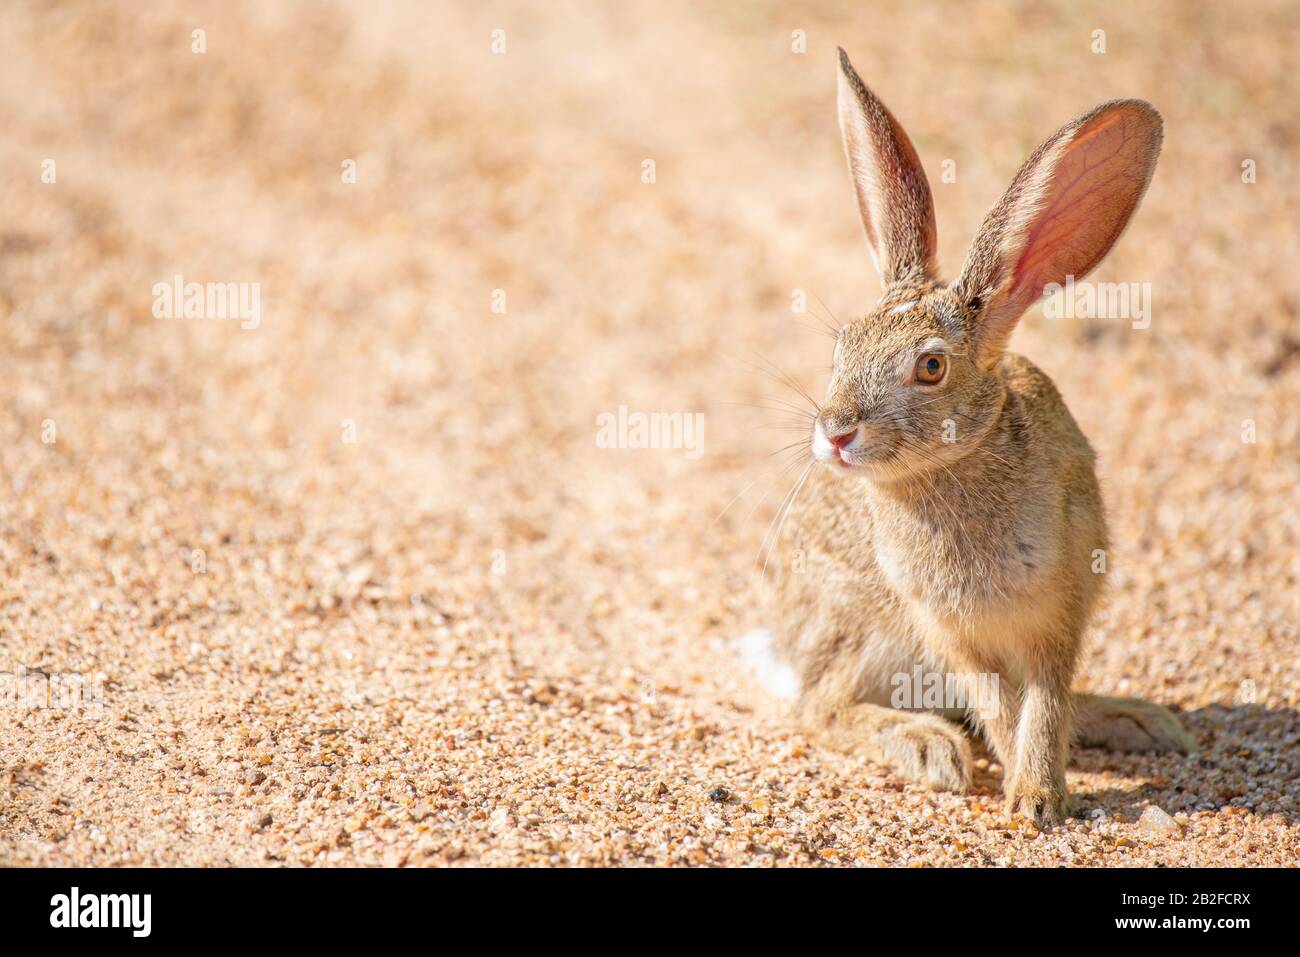 A semi backlit scrub hare - Lepus saxatilis - in the Kruger National Park, South Africa. The lighting enhances details in the blood vessels in the har Stock Photo